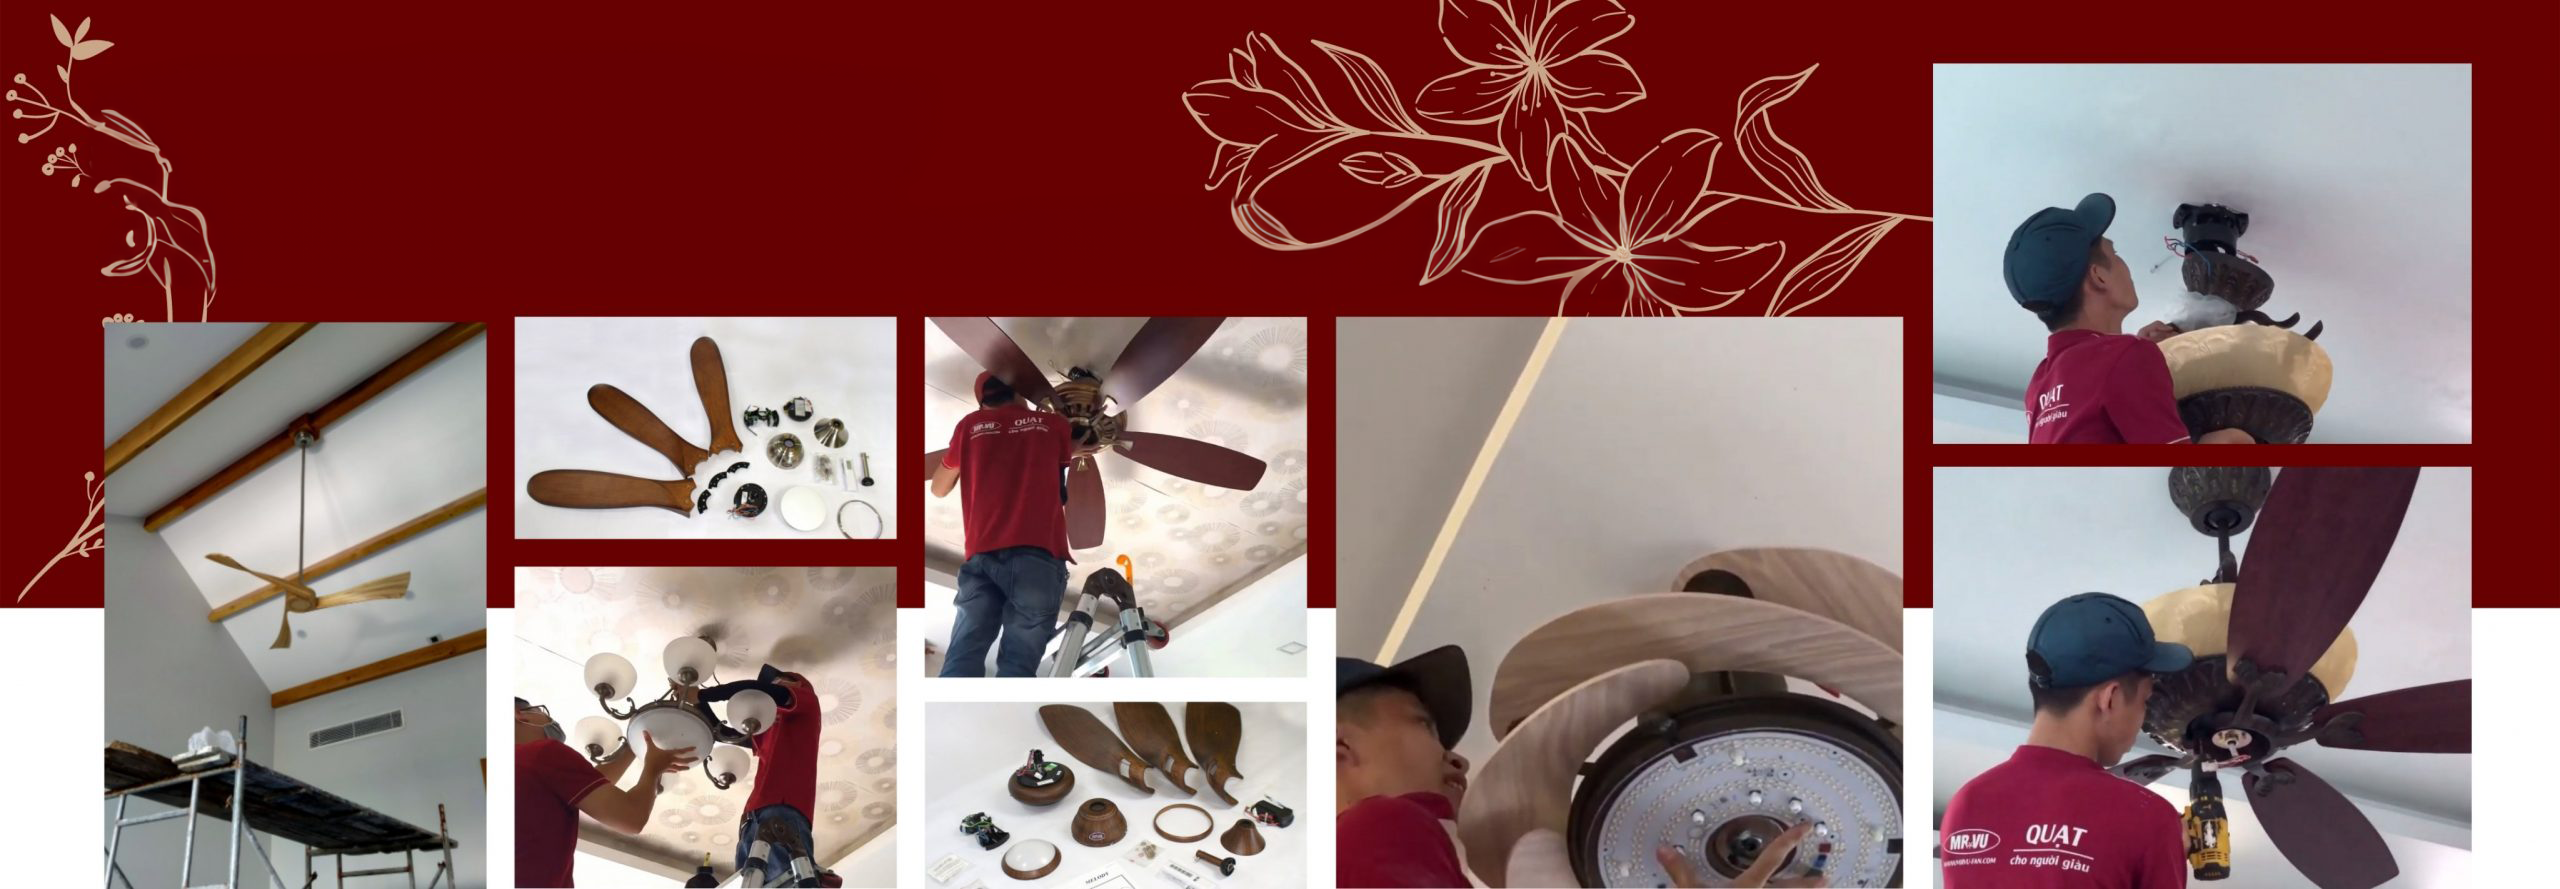 Improving Safety with Frequent Inspections of Ceiling Fans